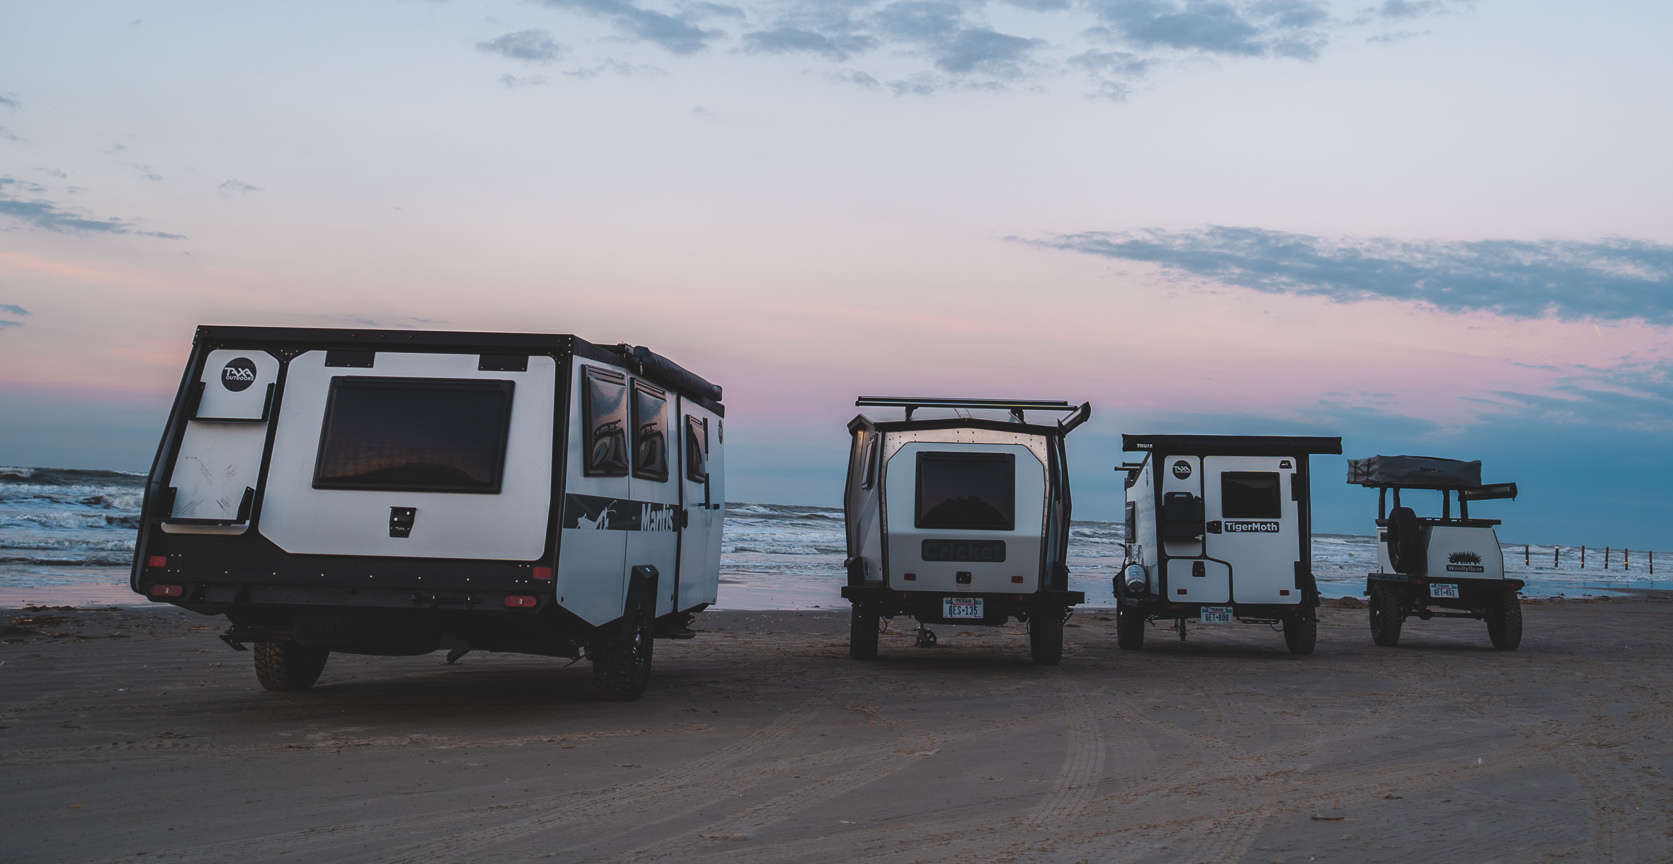 Taxa Outdoors RV company acquired by L Catterton - Houston Business Journal